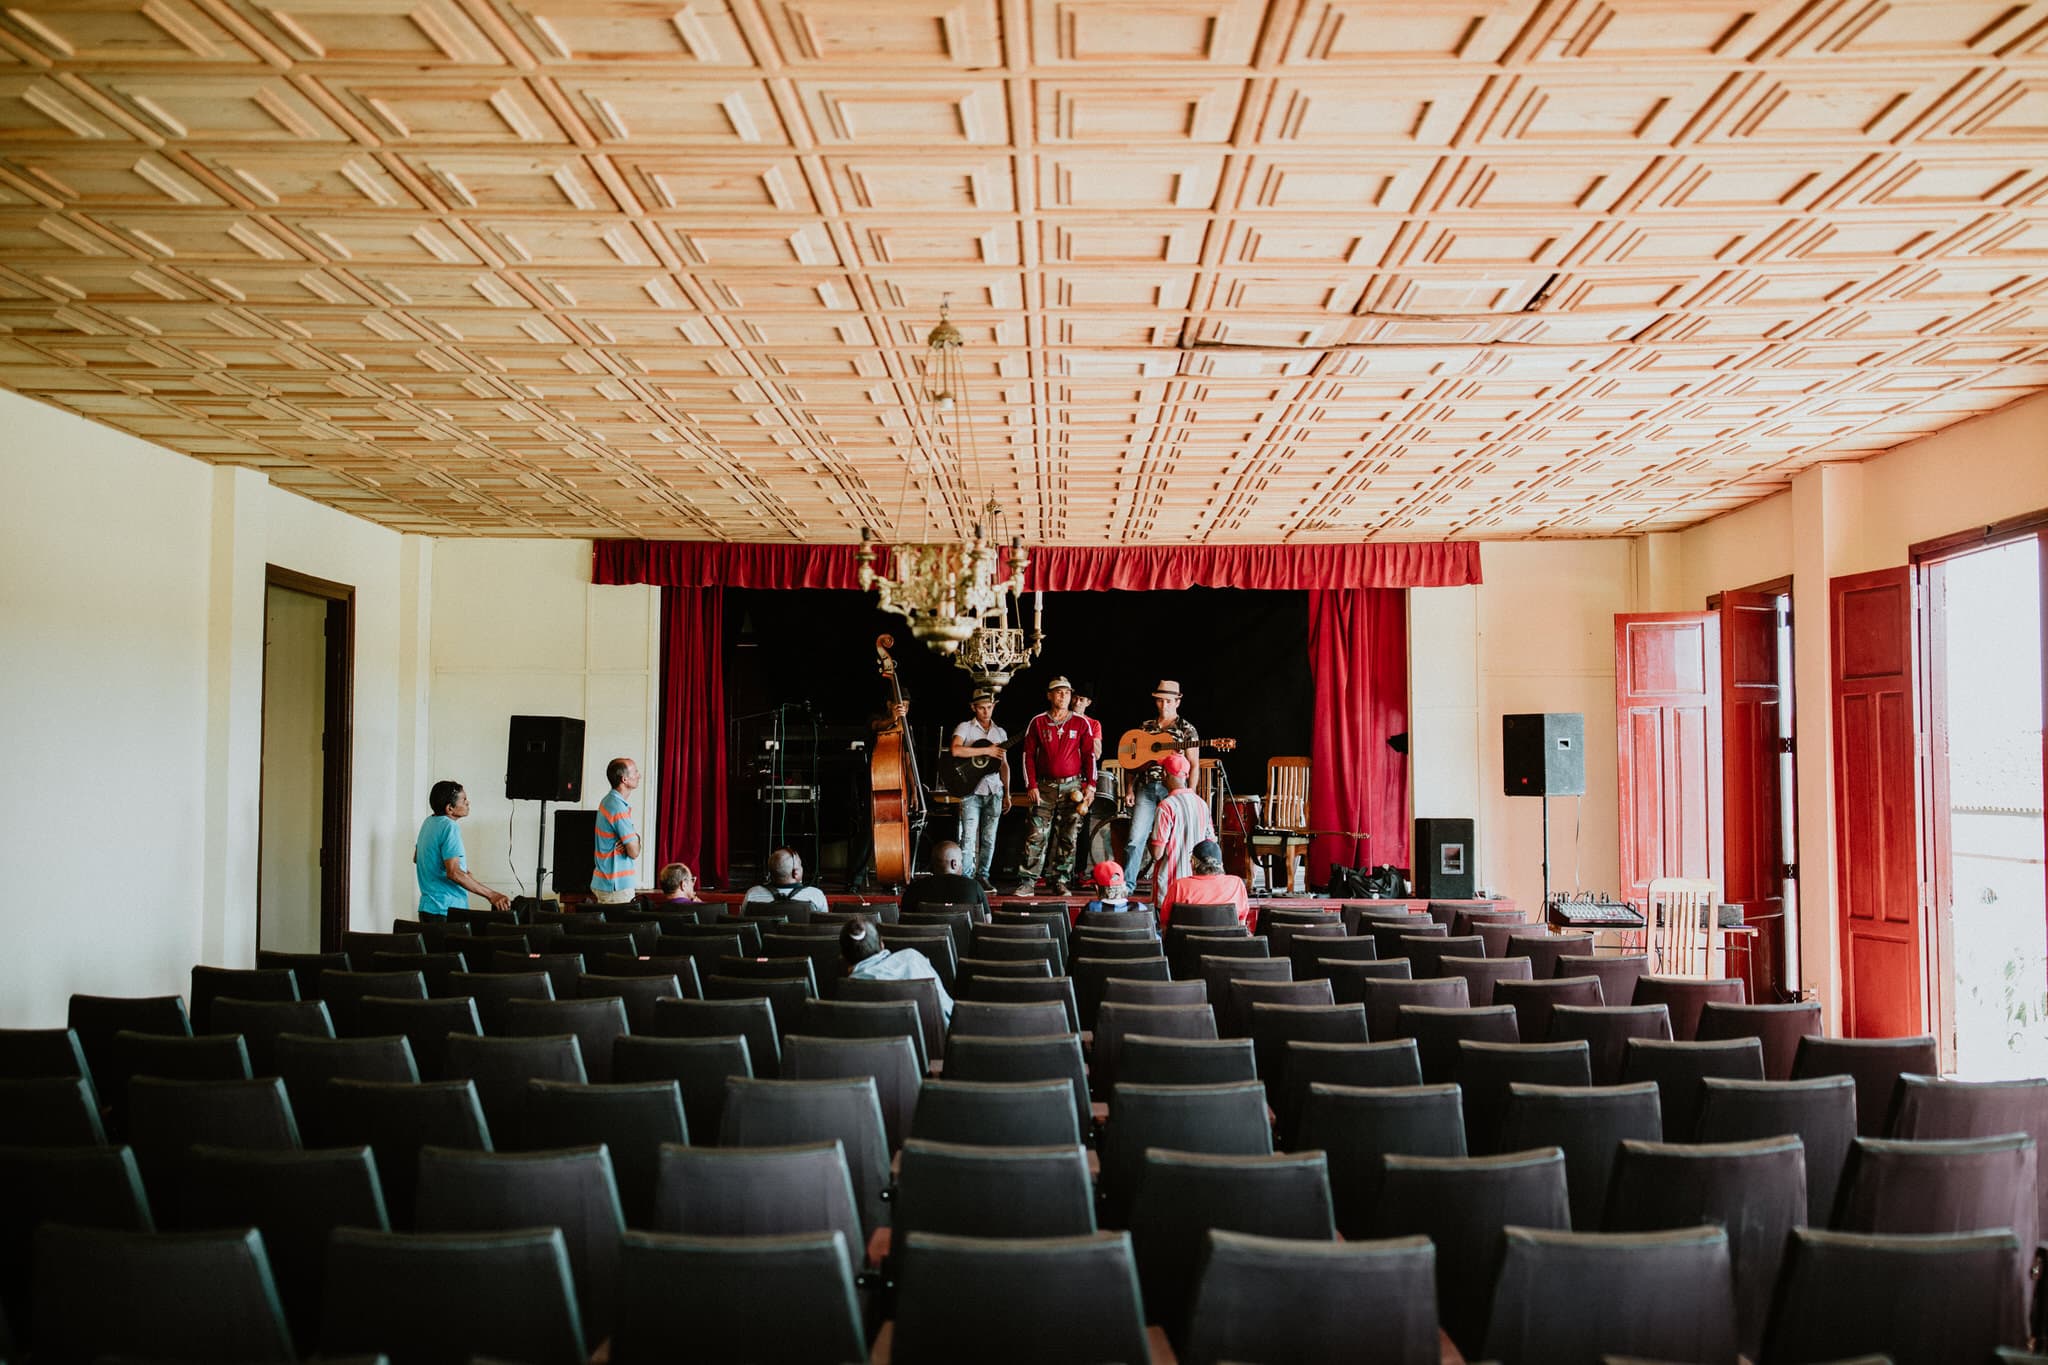 Concert hall in Vinales, Cuba. Wedding and travel photographer Brent Calis.